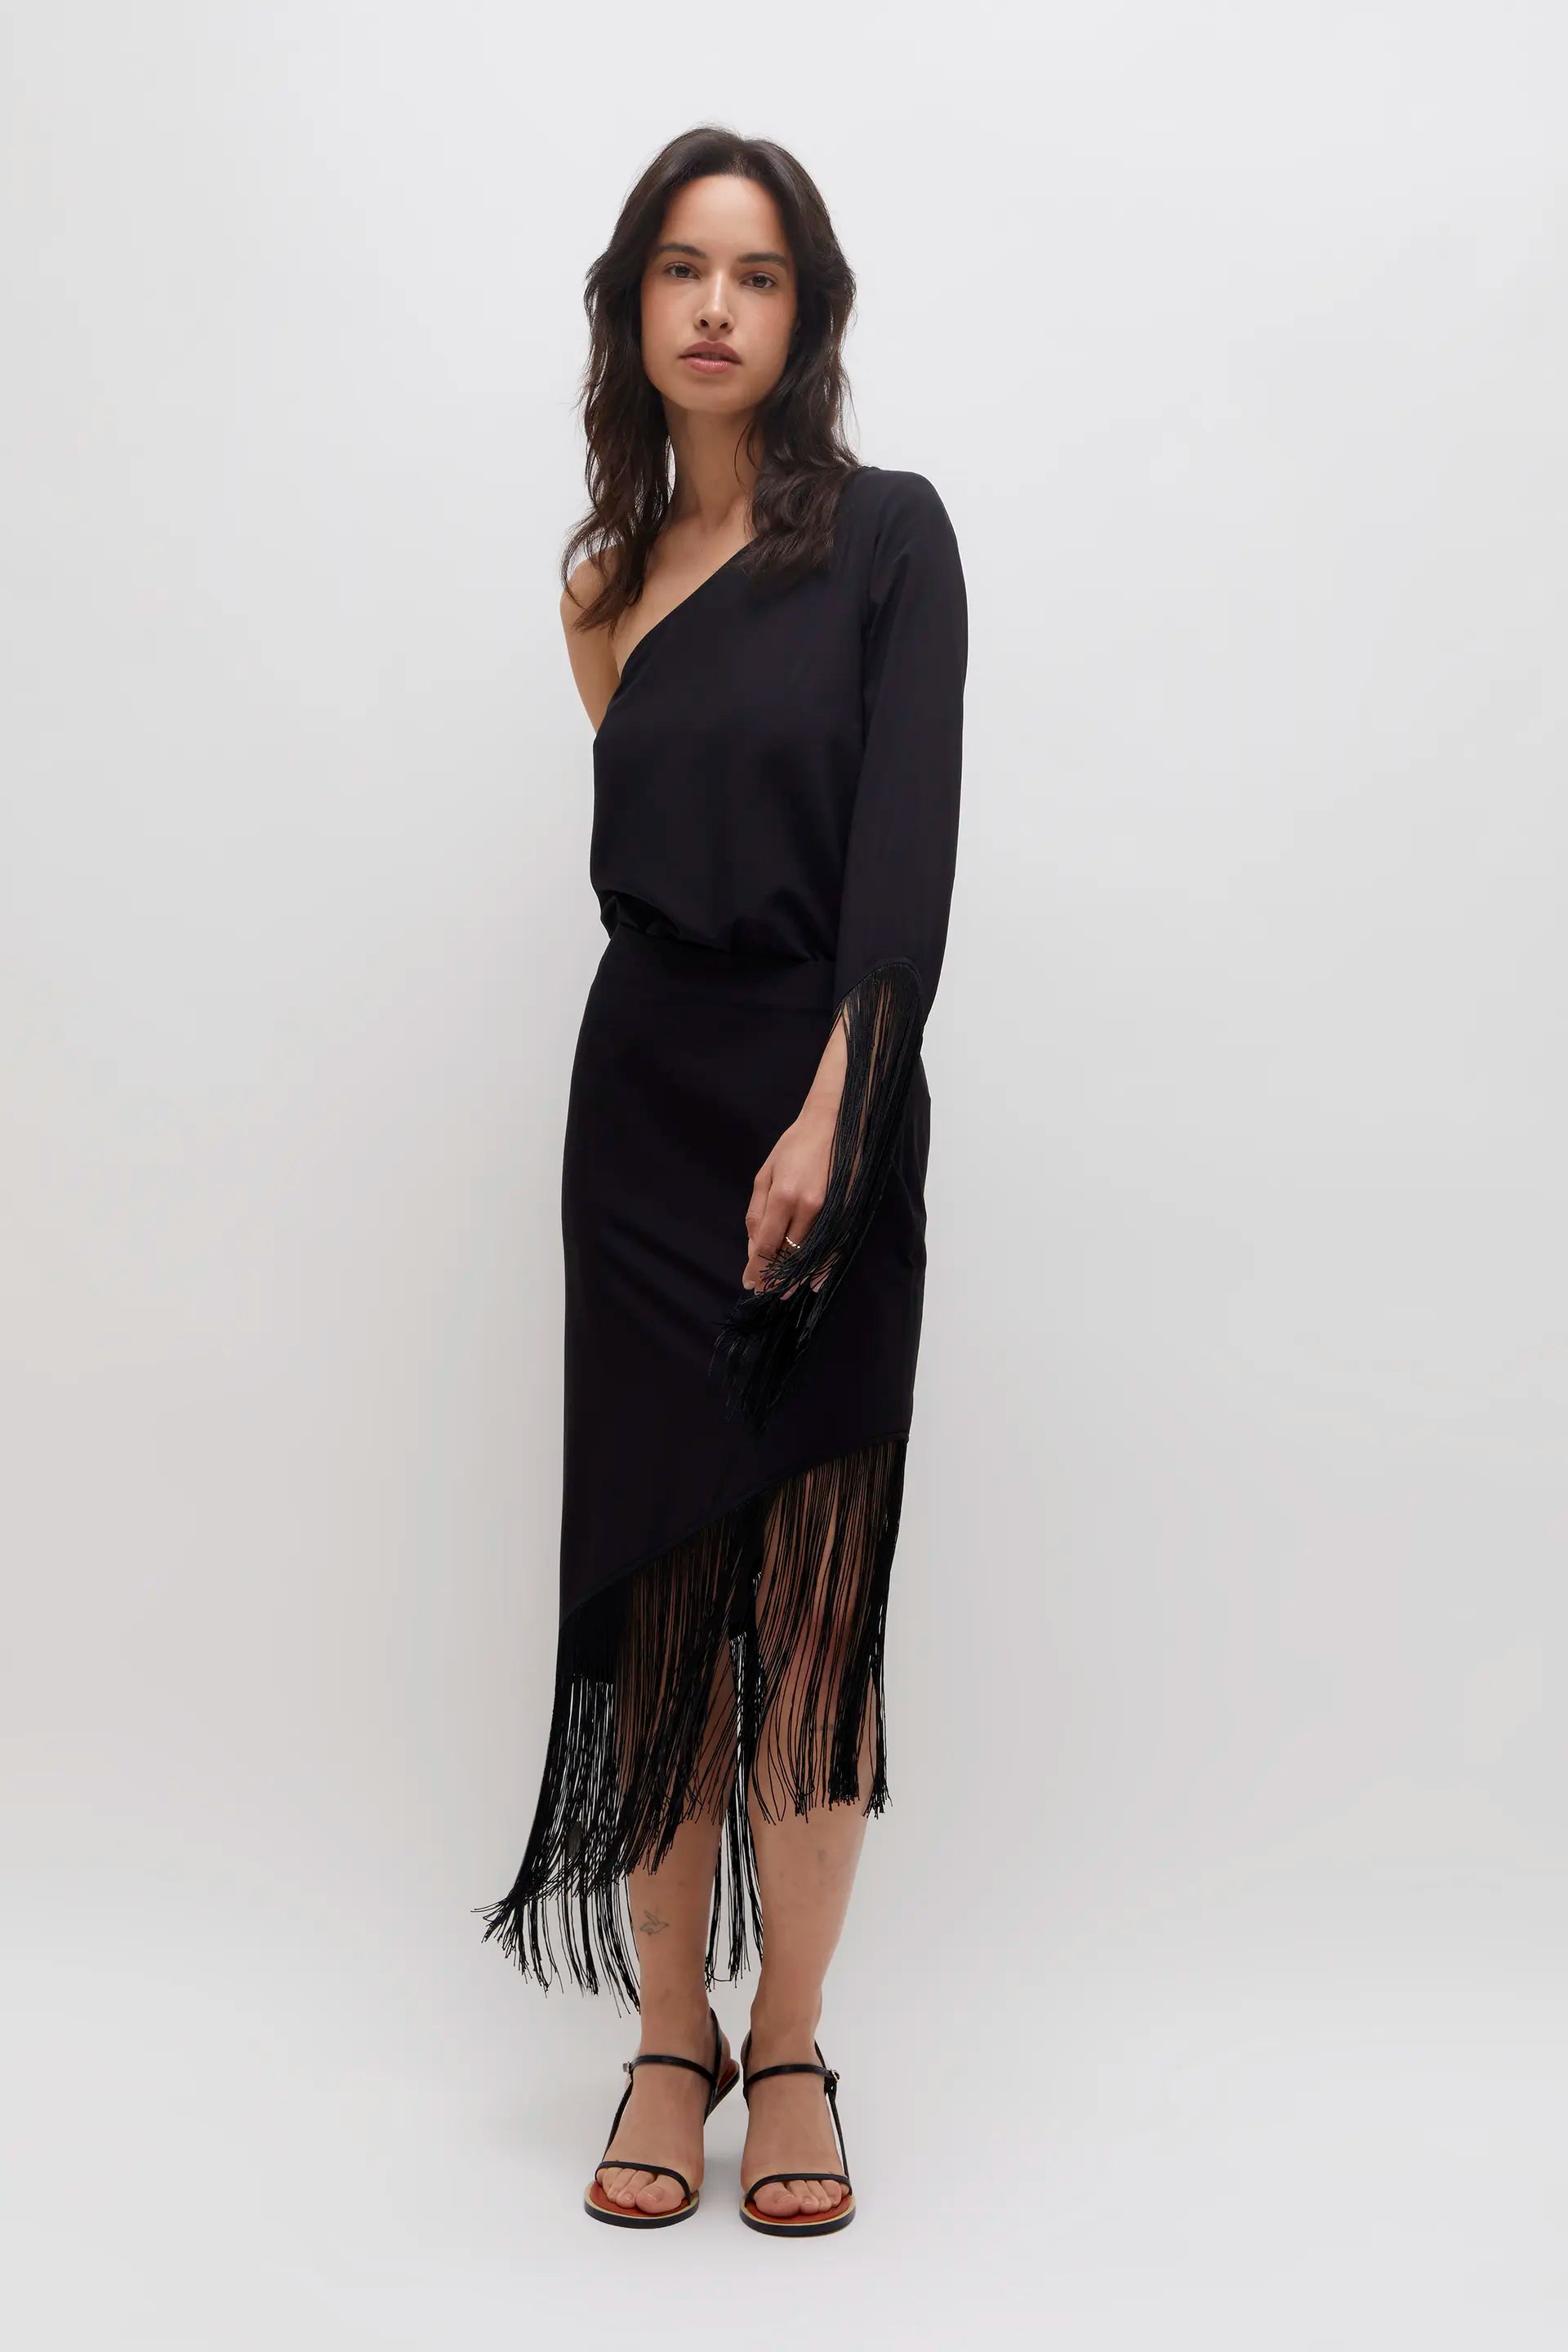 Wild Pony Asymmetrical top with black fringes